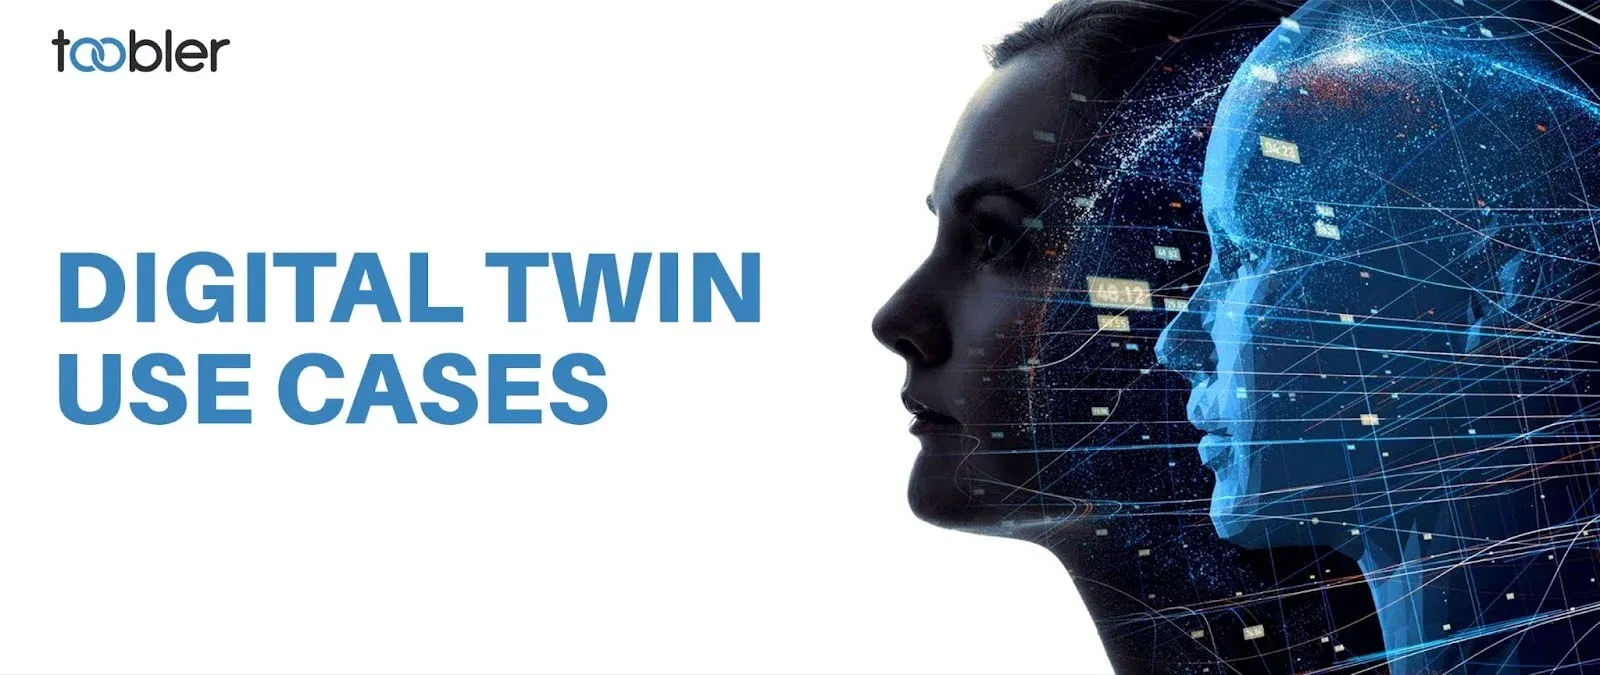 50+ Use Cases of Digital Twins Across Industries